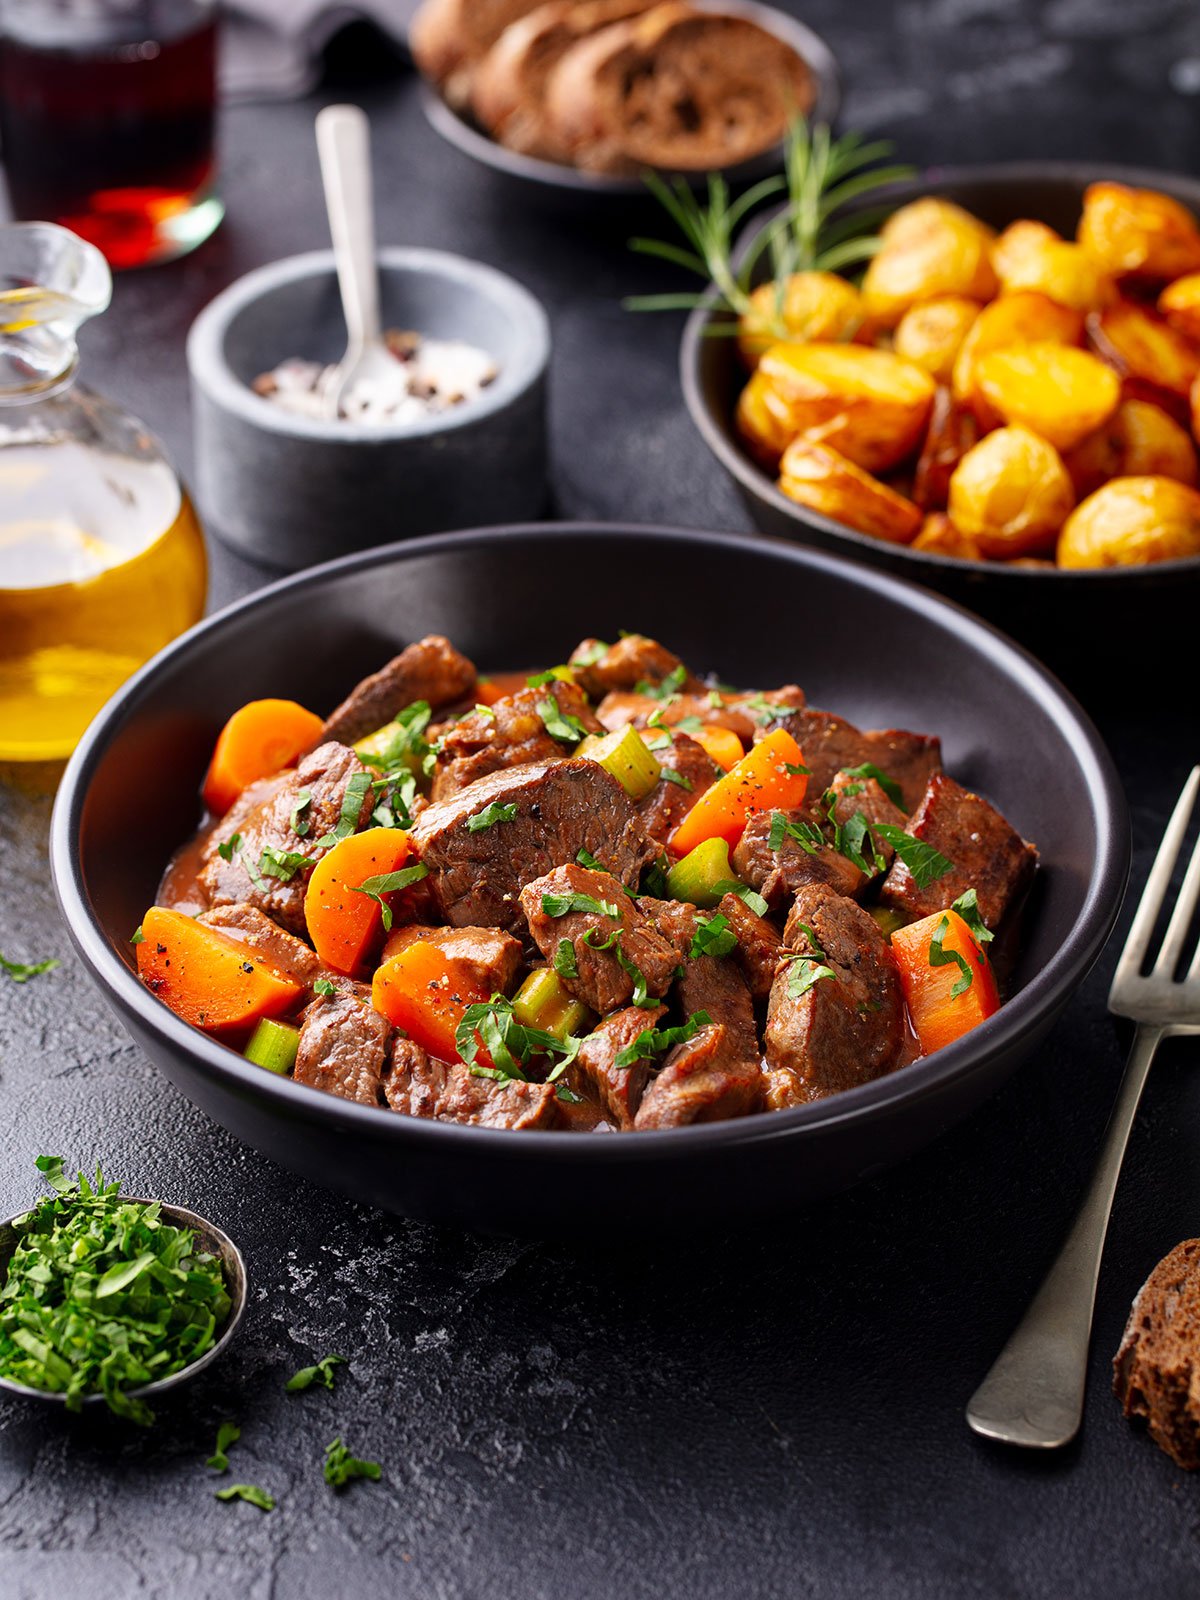 Classic Beef Stew with Vegetables